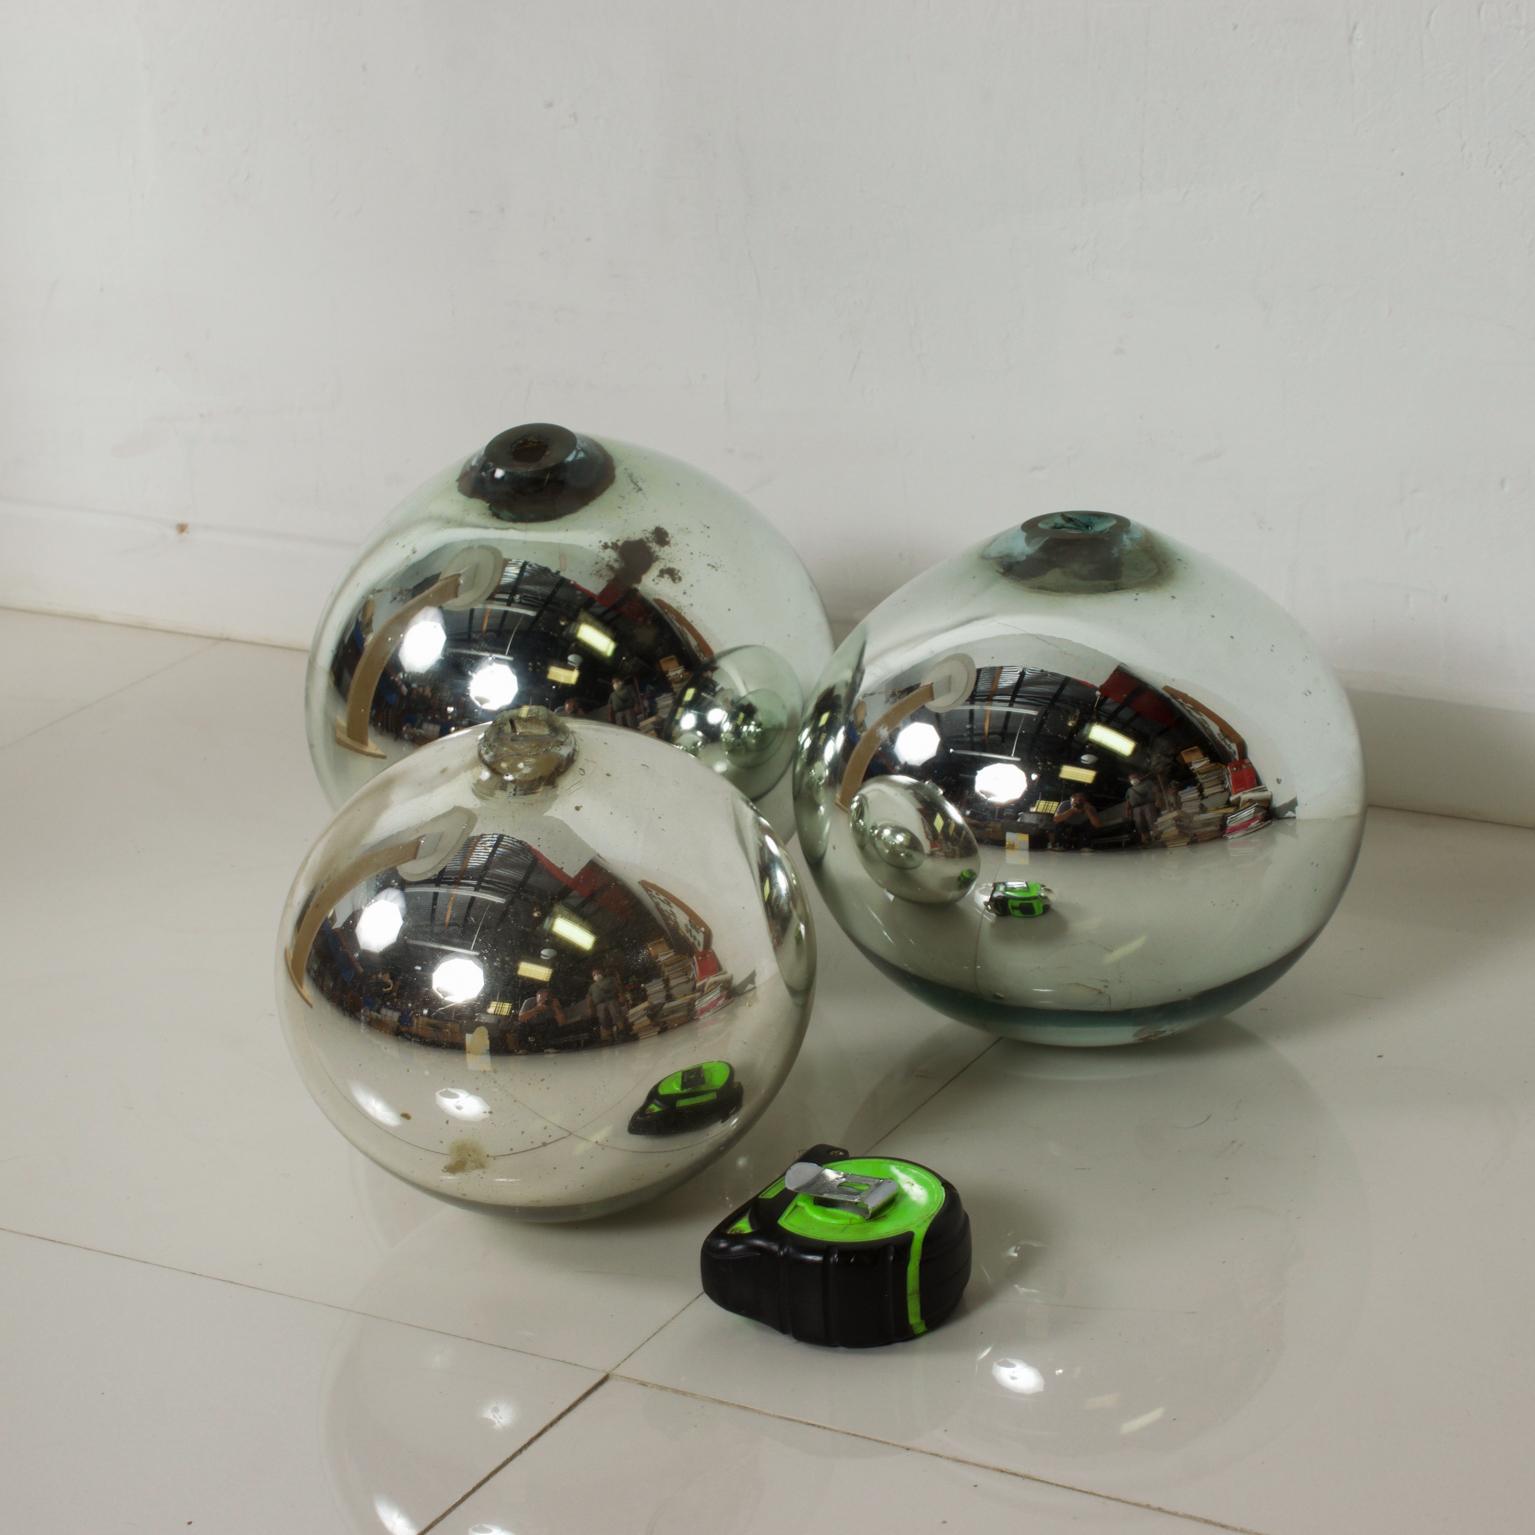 Mexican Vintage 1950s Mexico Mercury Glass Globes Gazing Ball Spheres- set of 3